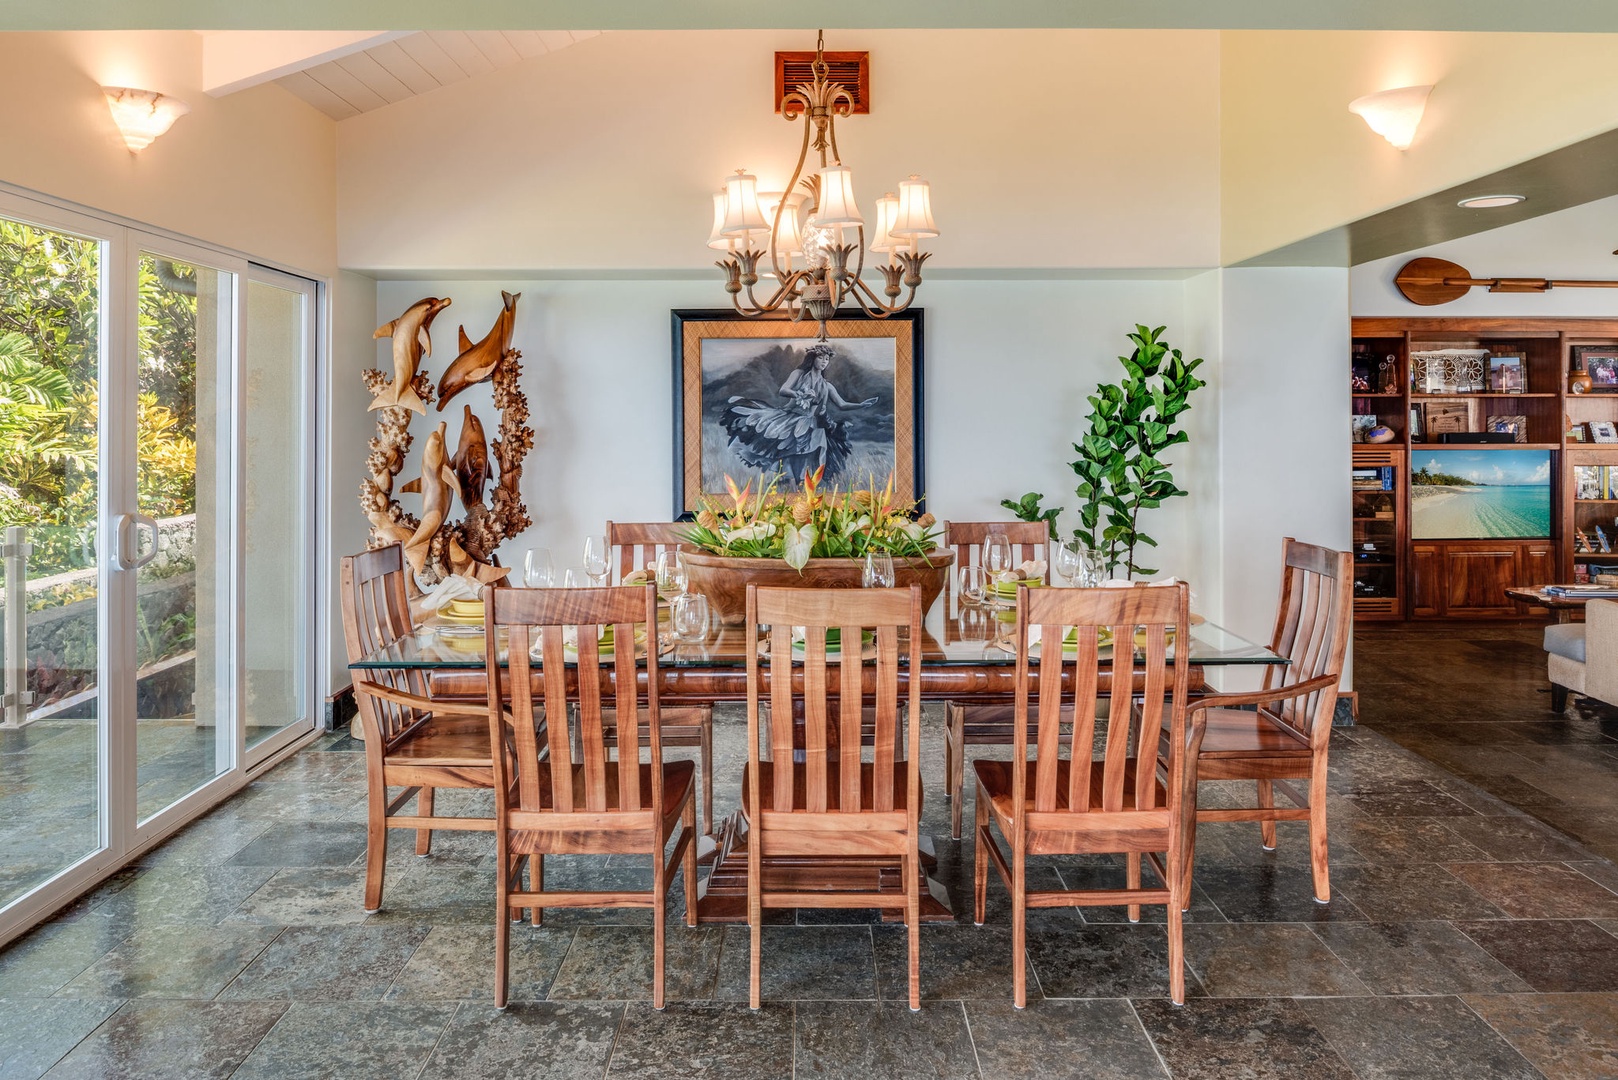 Kailua Kona Vacation Rentals, Kona Beach Bungalows** - Dine in elegance in the Moana Hale Great Room, seating eight amidst refined ambiance.